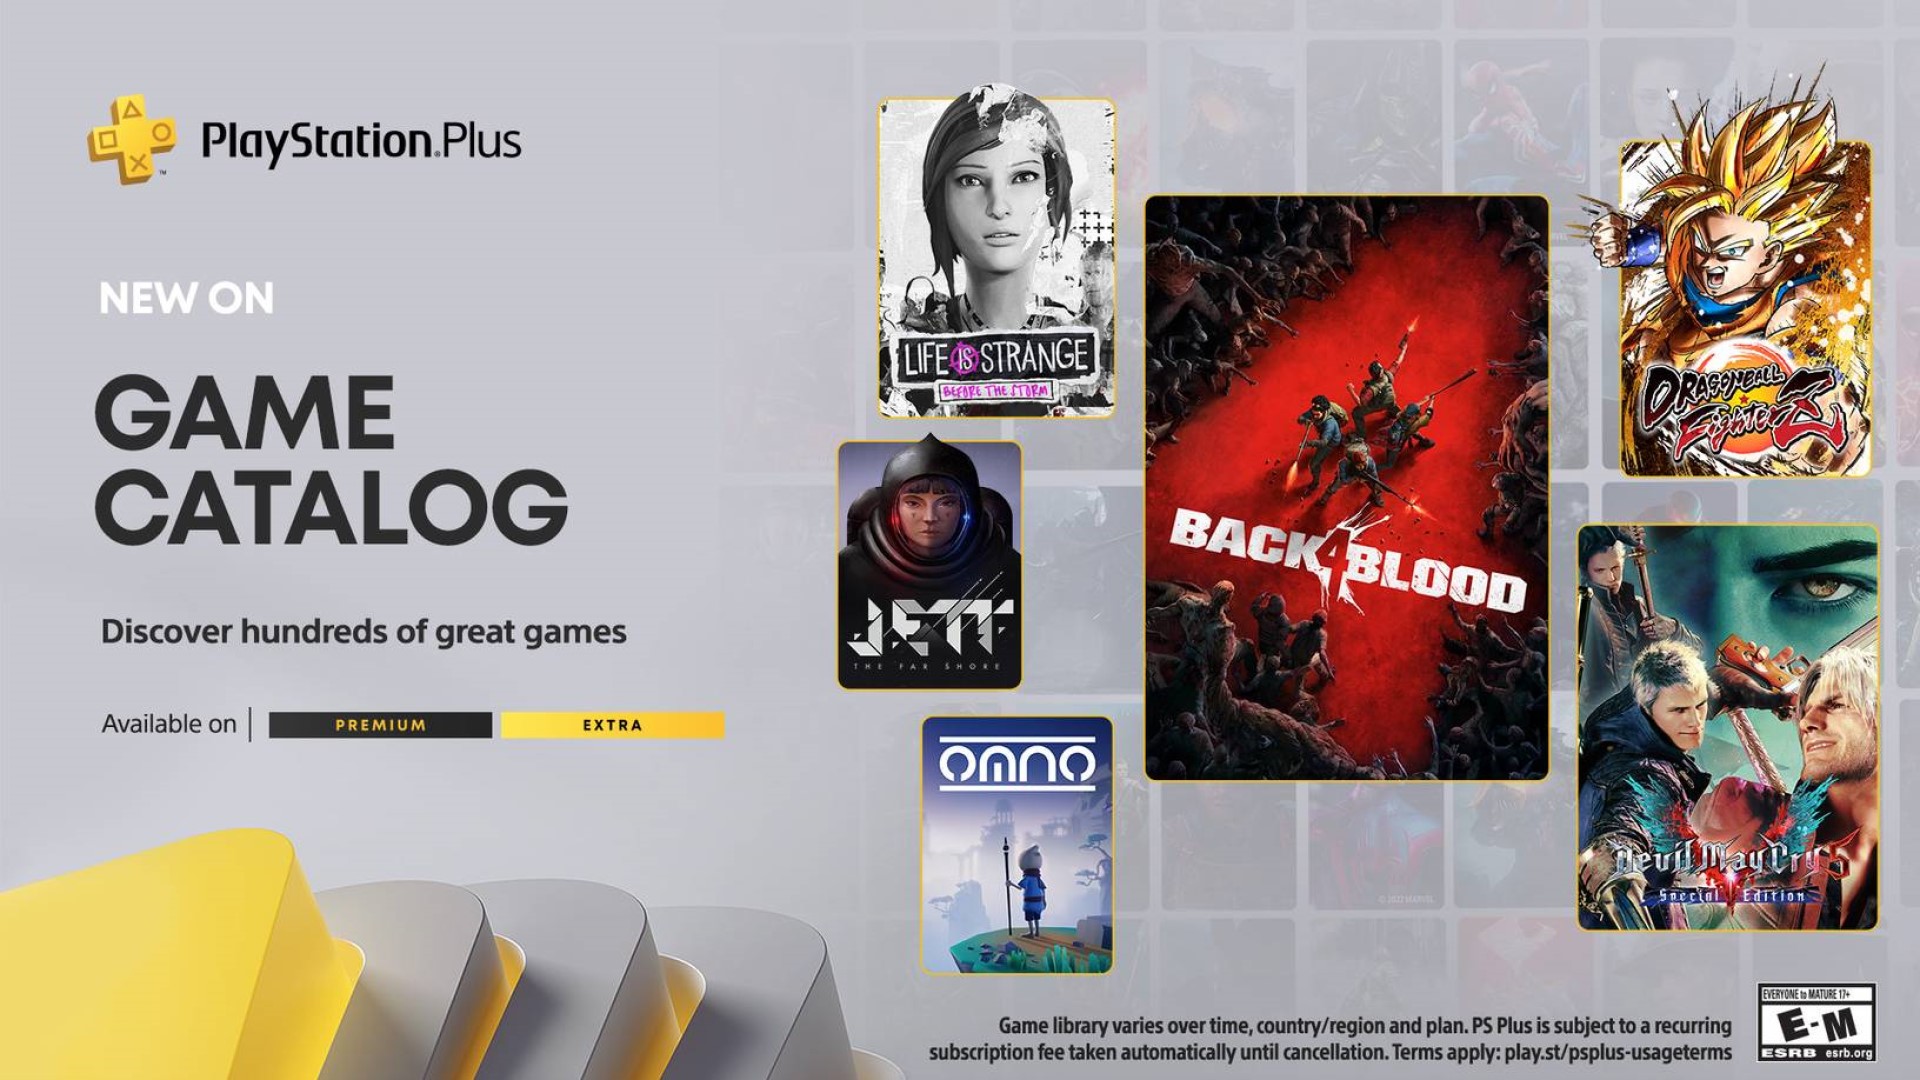 Back 4 Blood, Dragon Ball FighterZ, Life is Strange Free with PS Plus